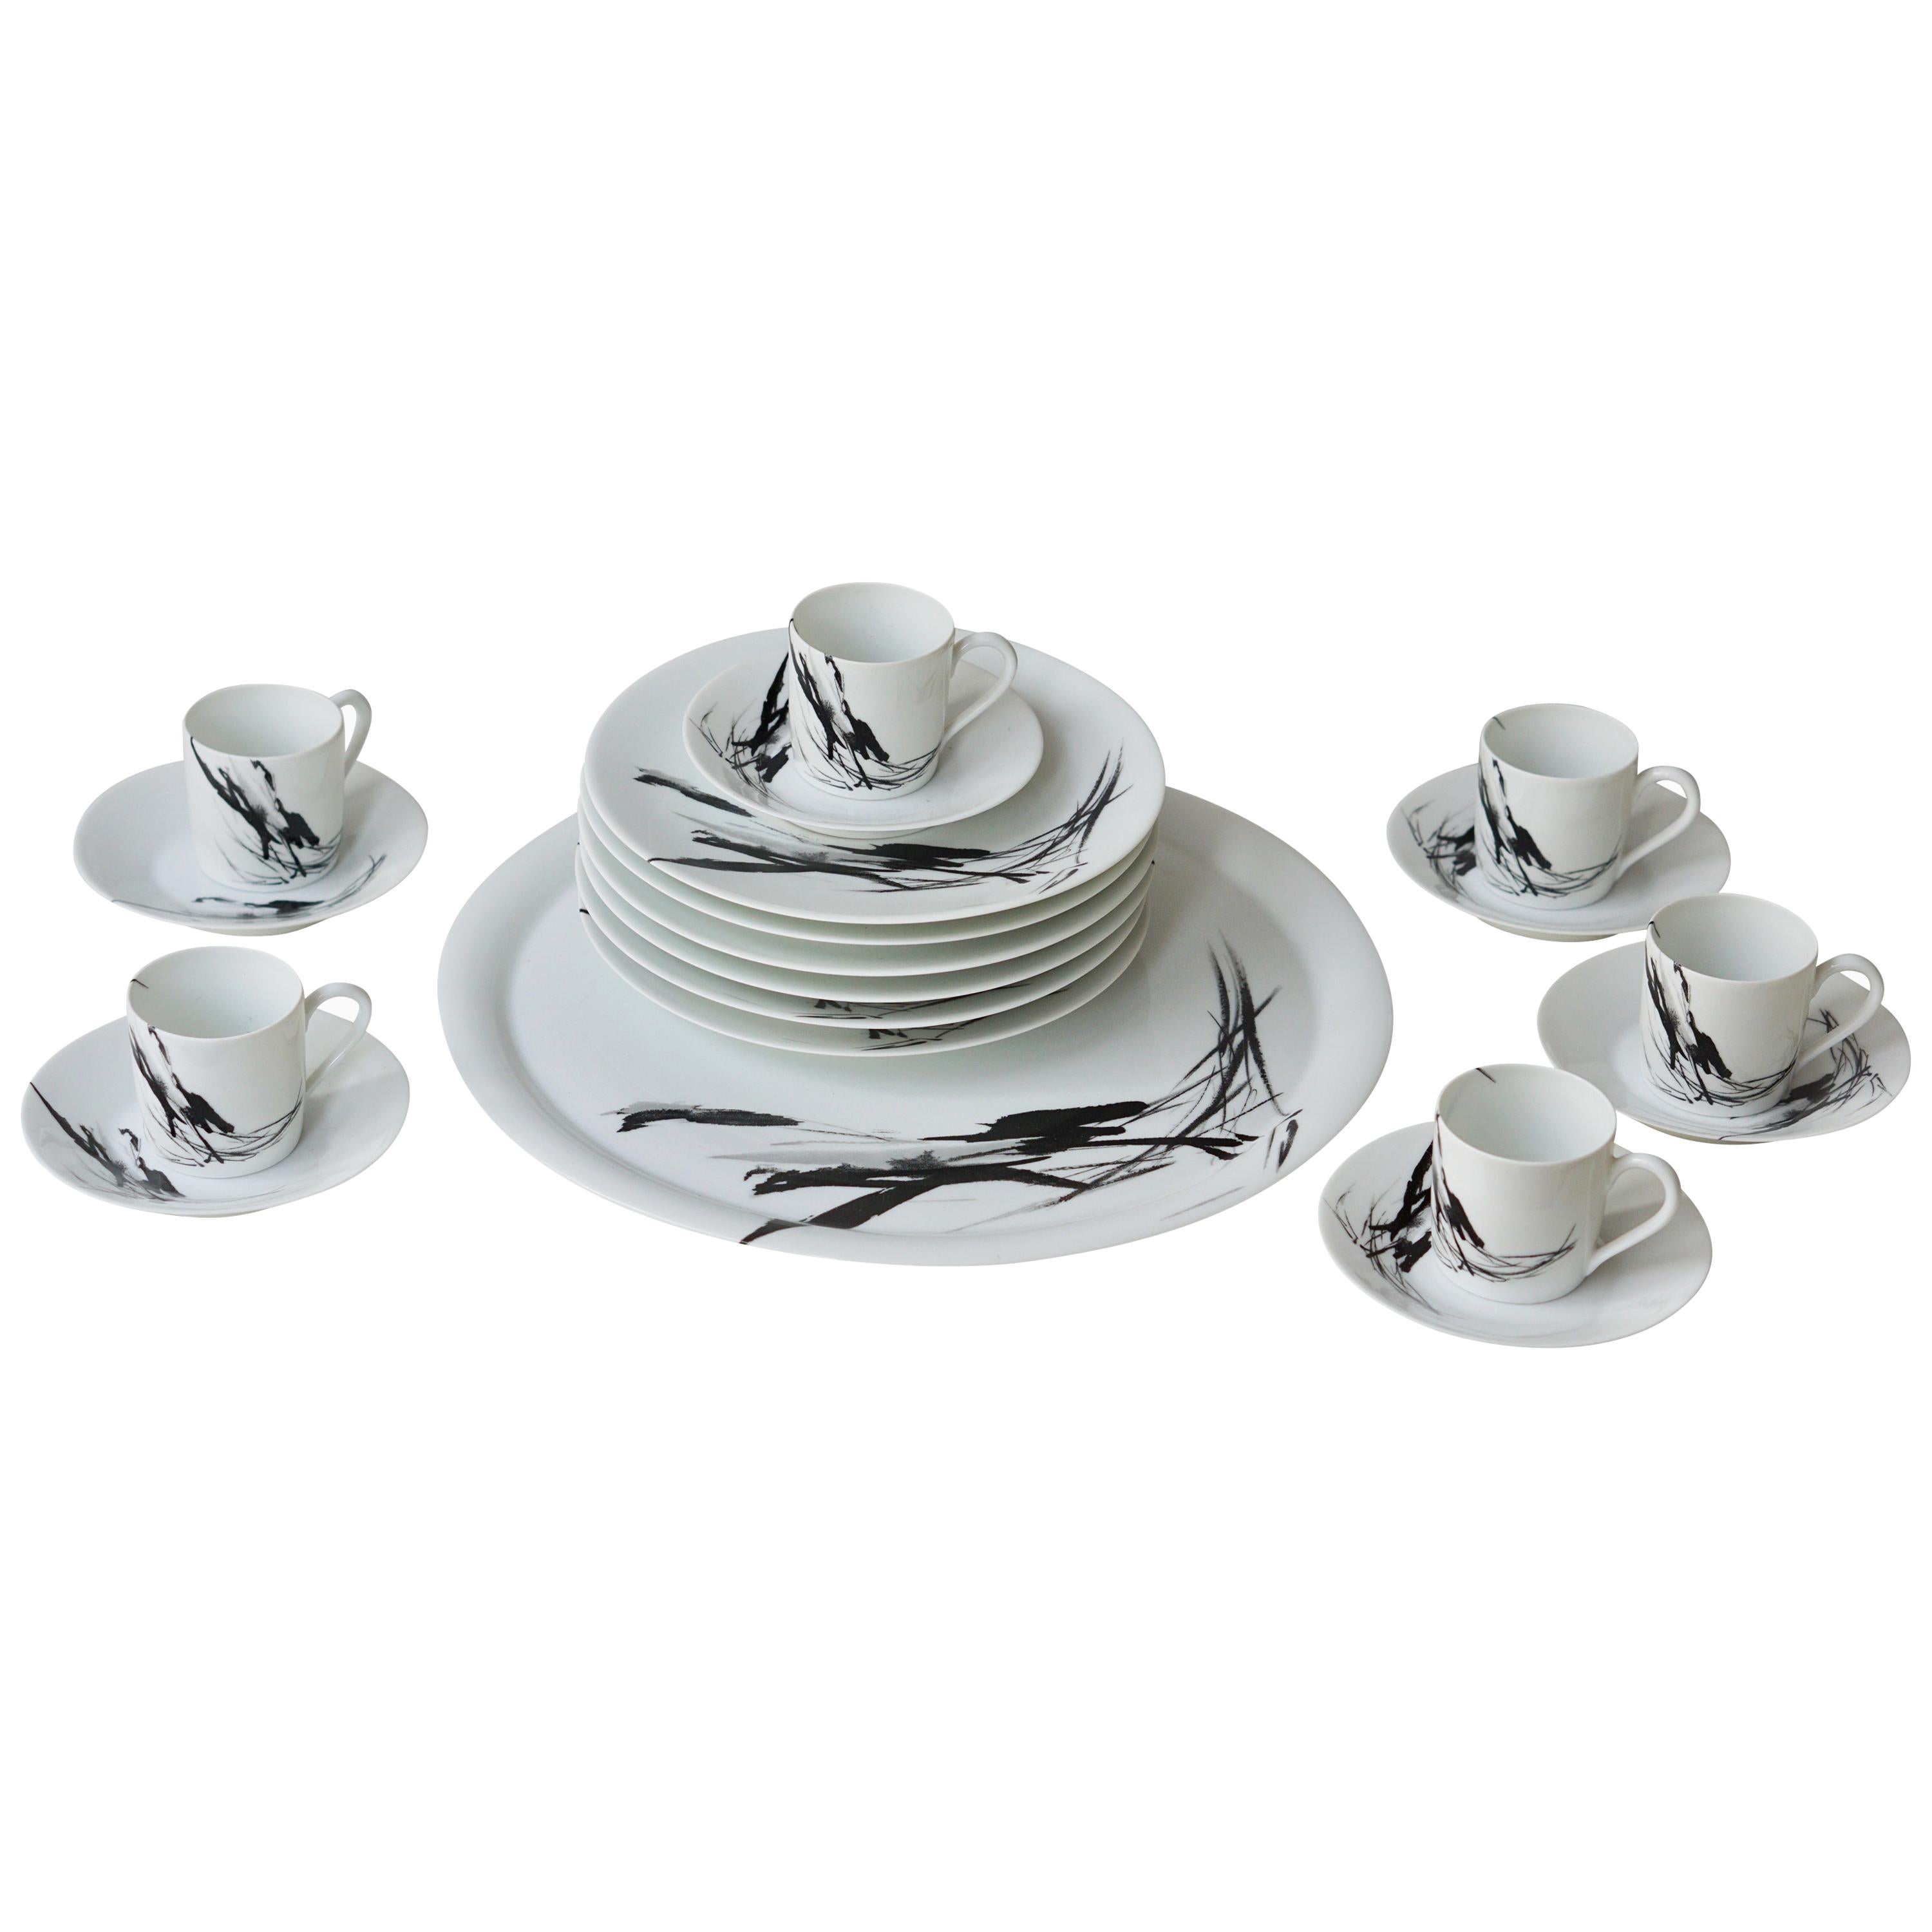 Limoges Porcelain Tea and Coffee Service by Pierre Cardin